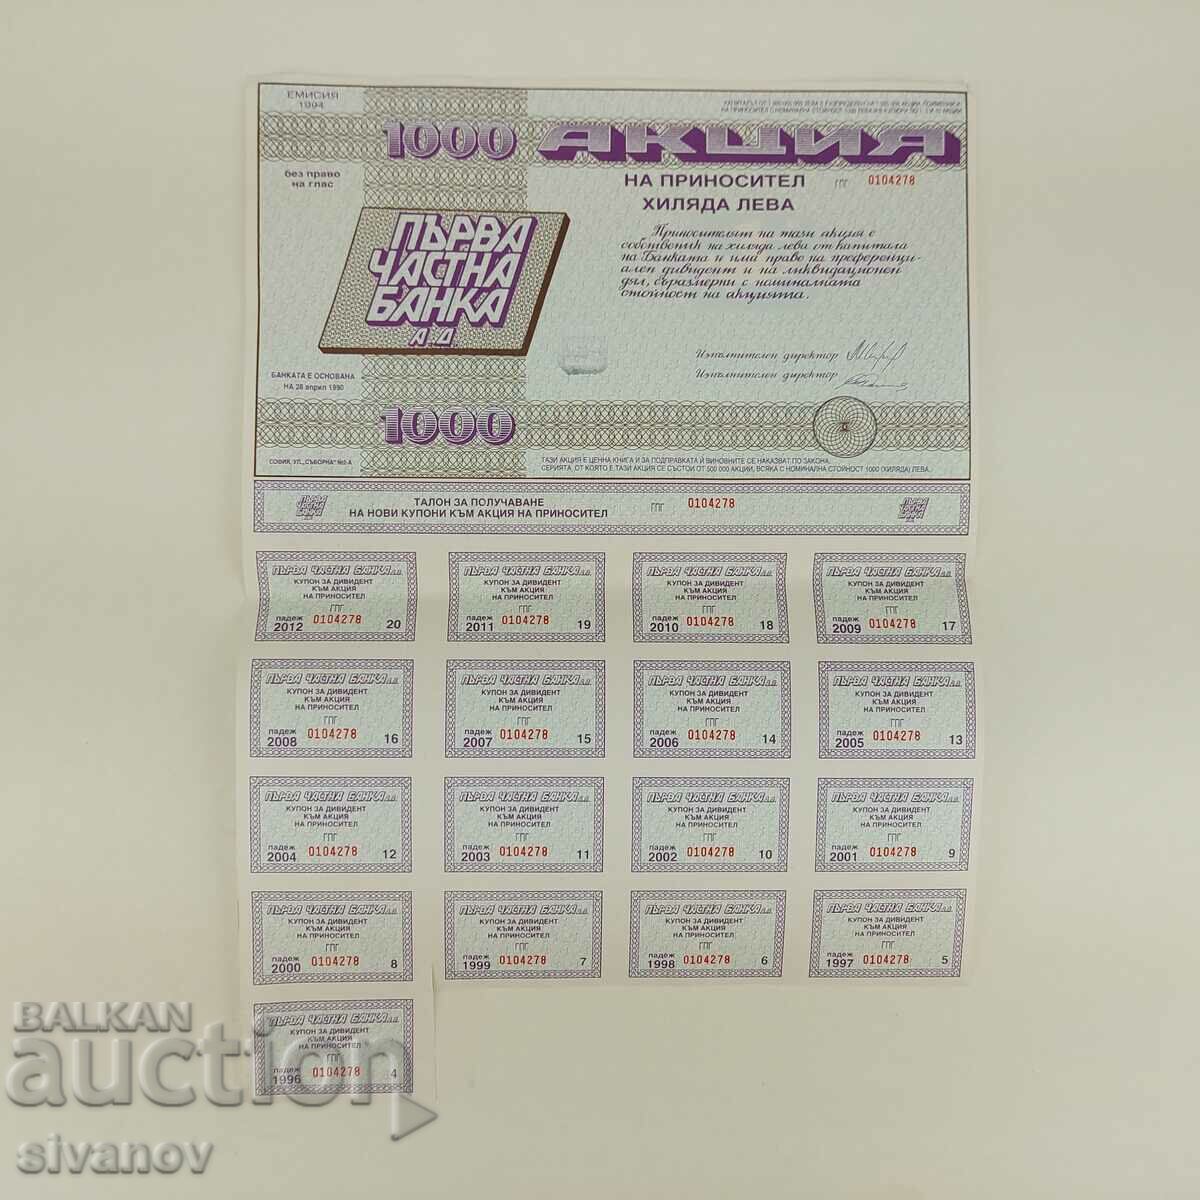 Share 1000 BGN First Private Bank Issue 1994 Nr. 4590